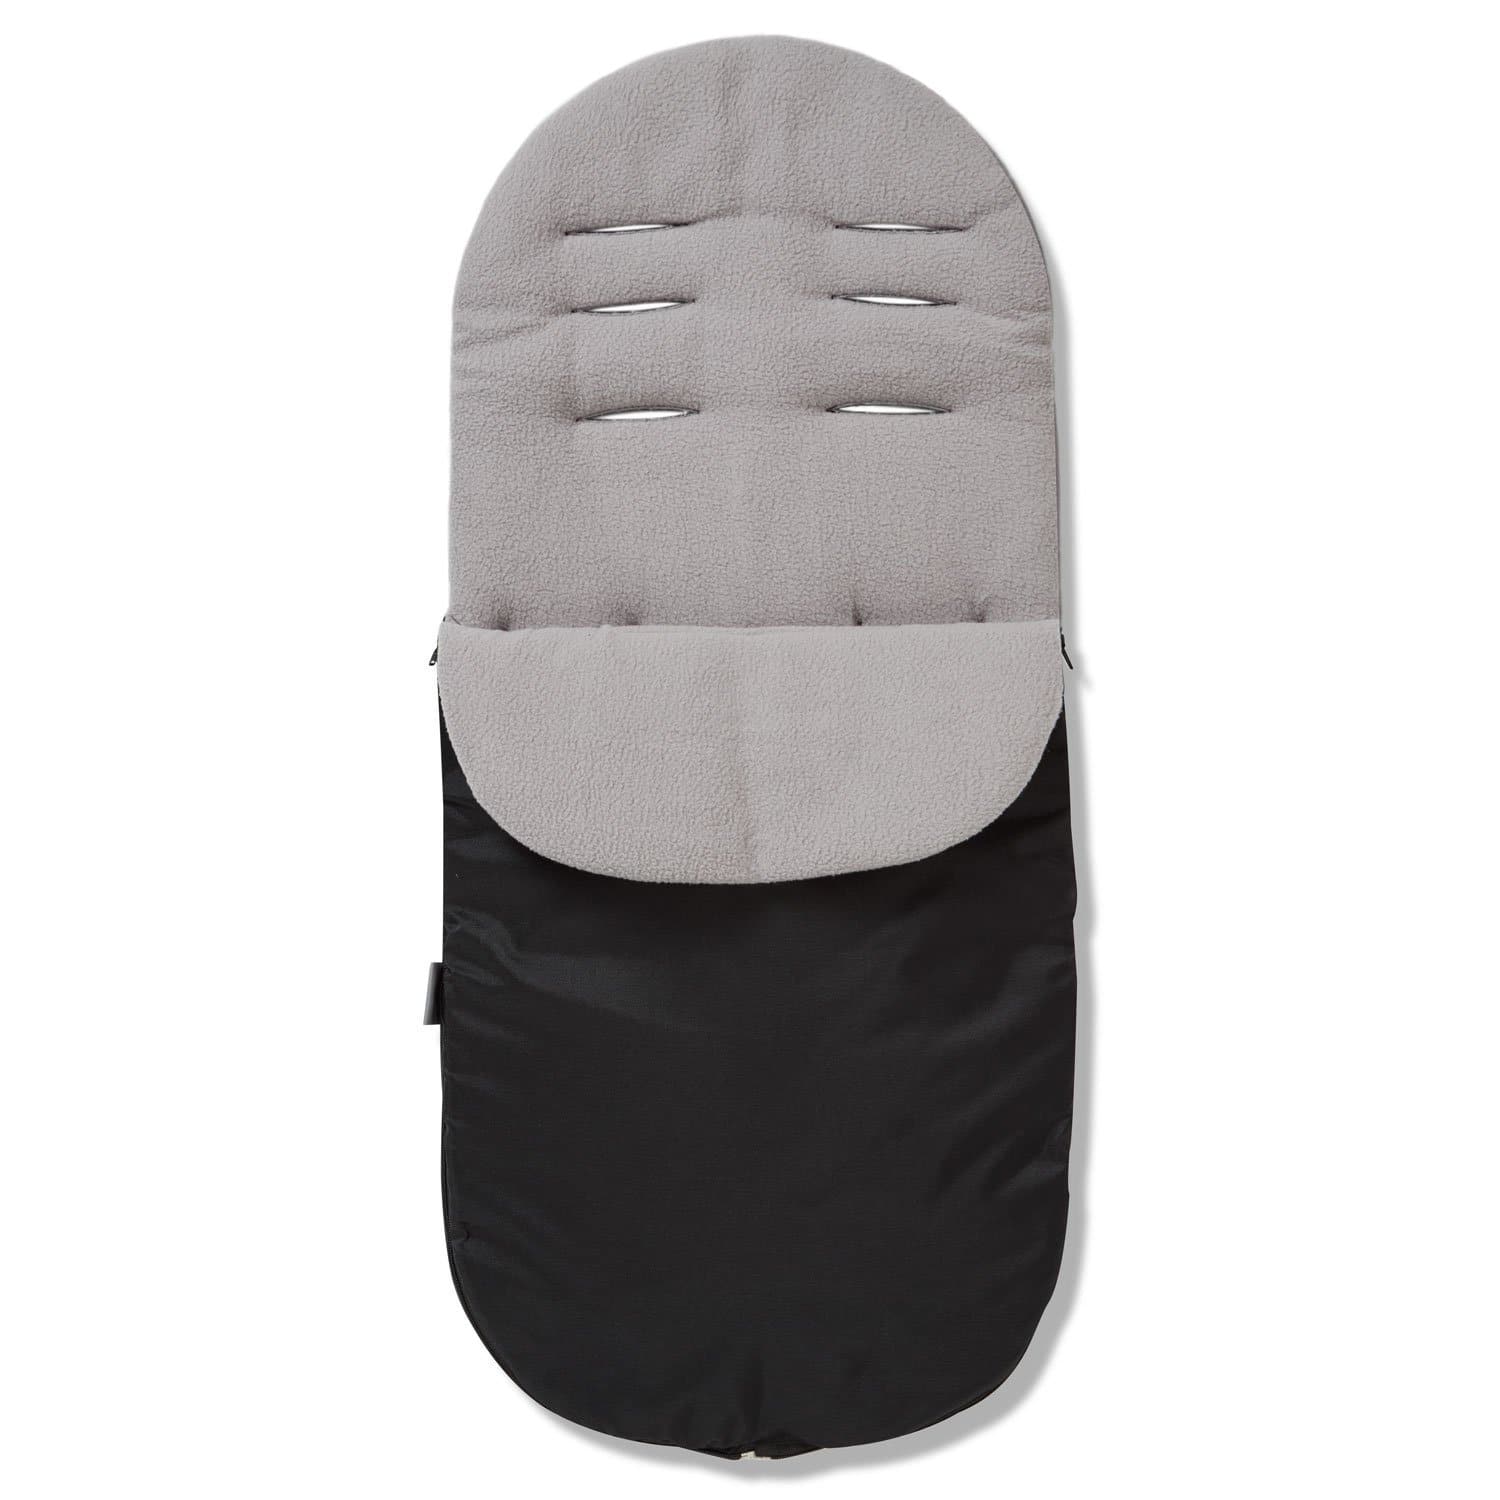 Footmuff / Cosy Toes Compatible with Greentom - For Your Little One